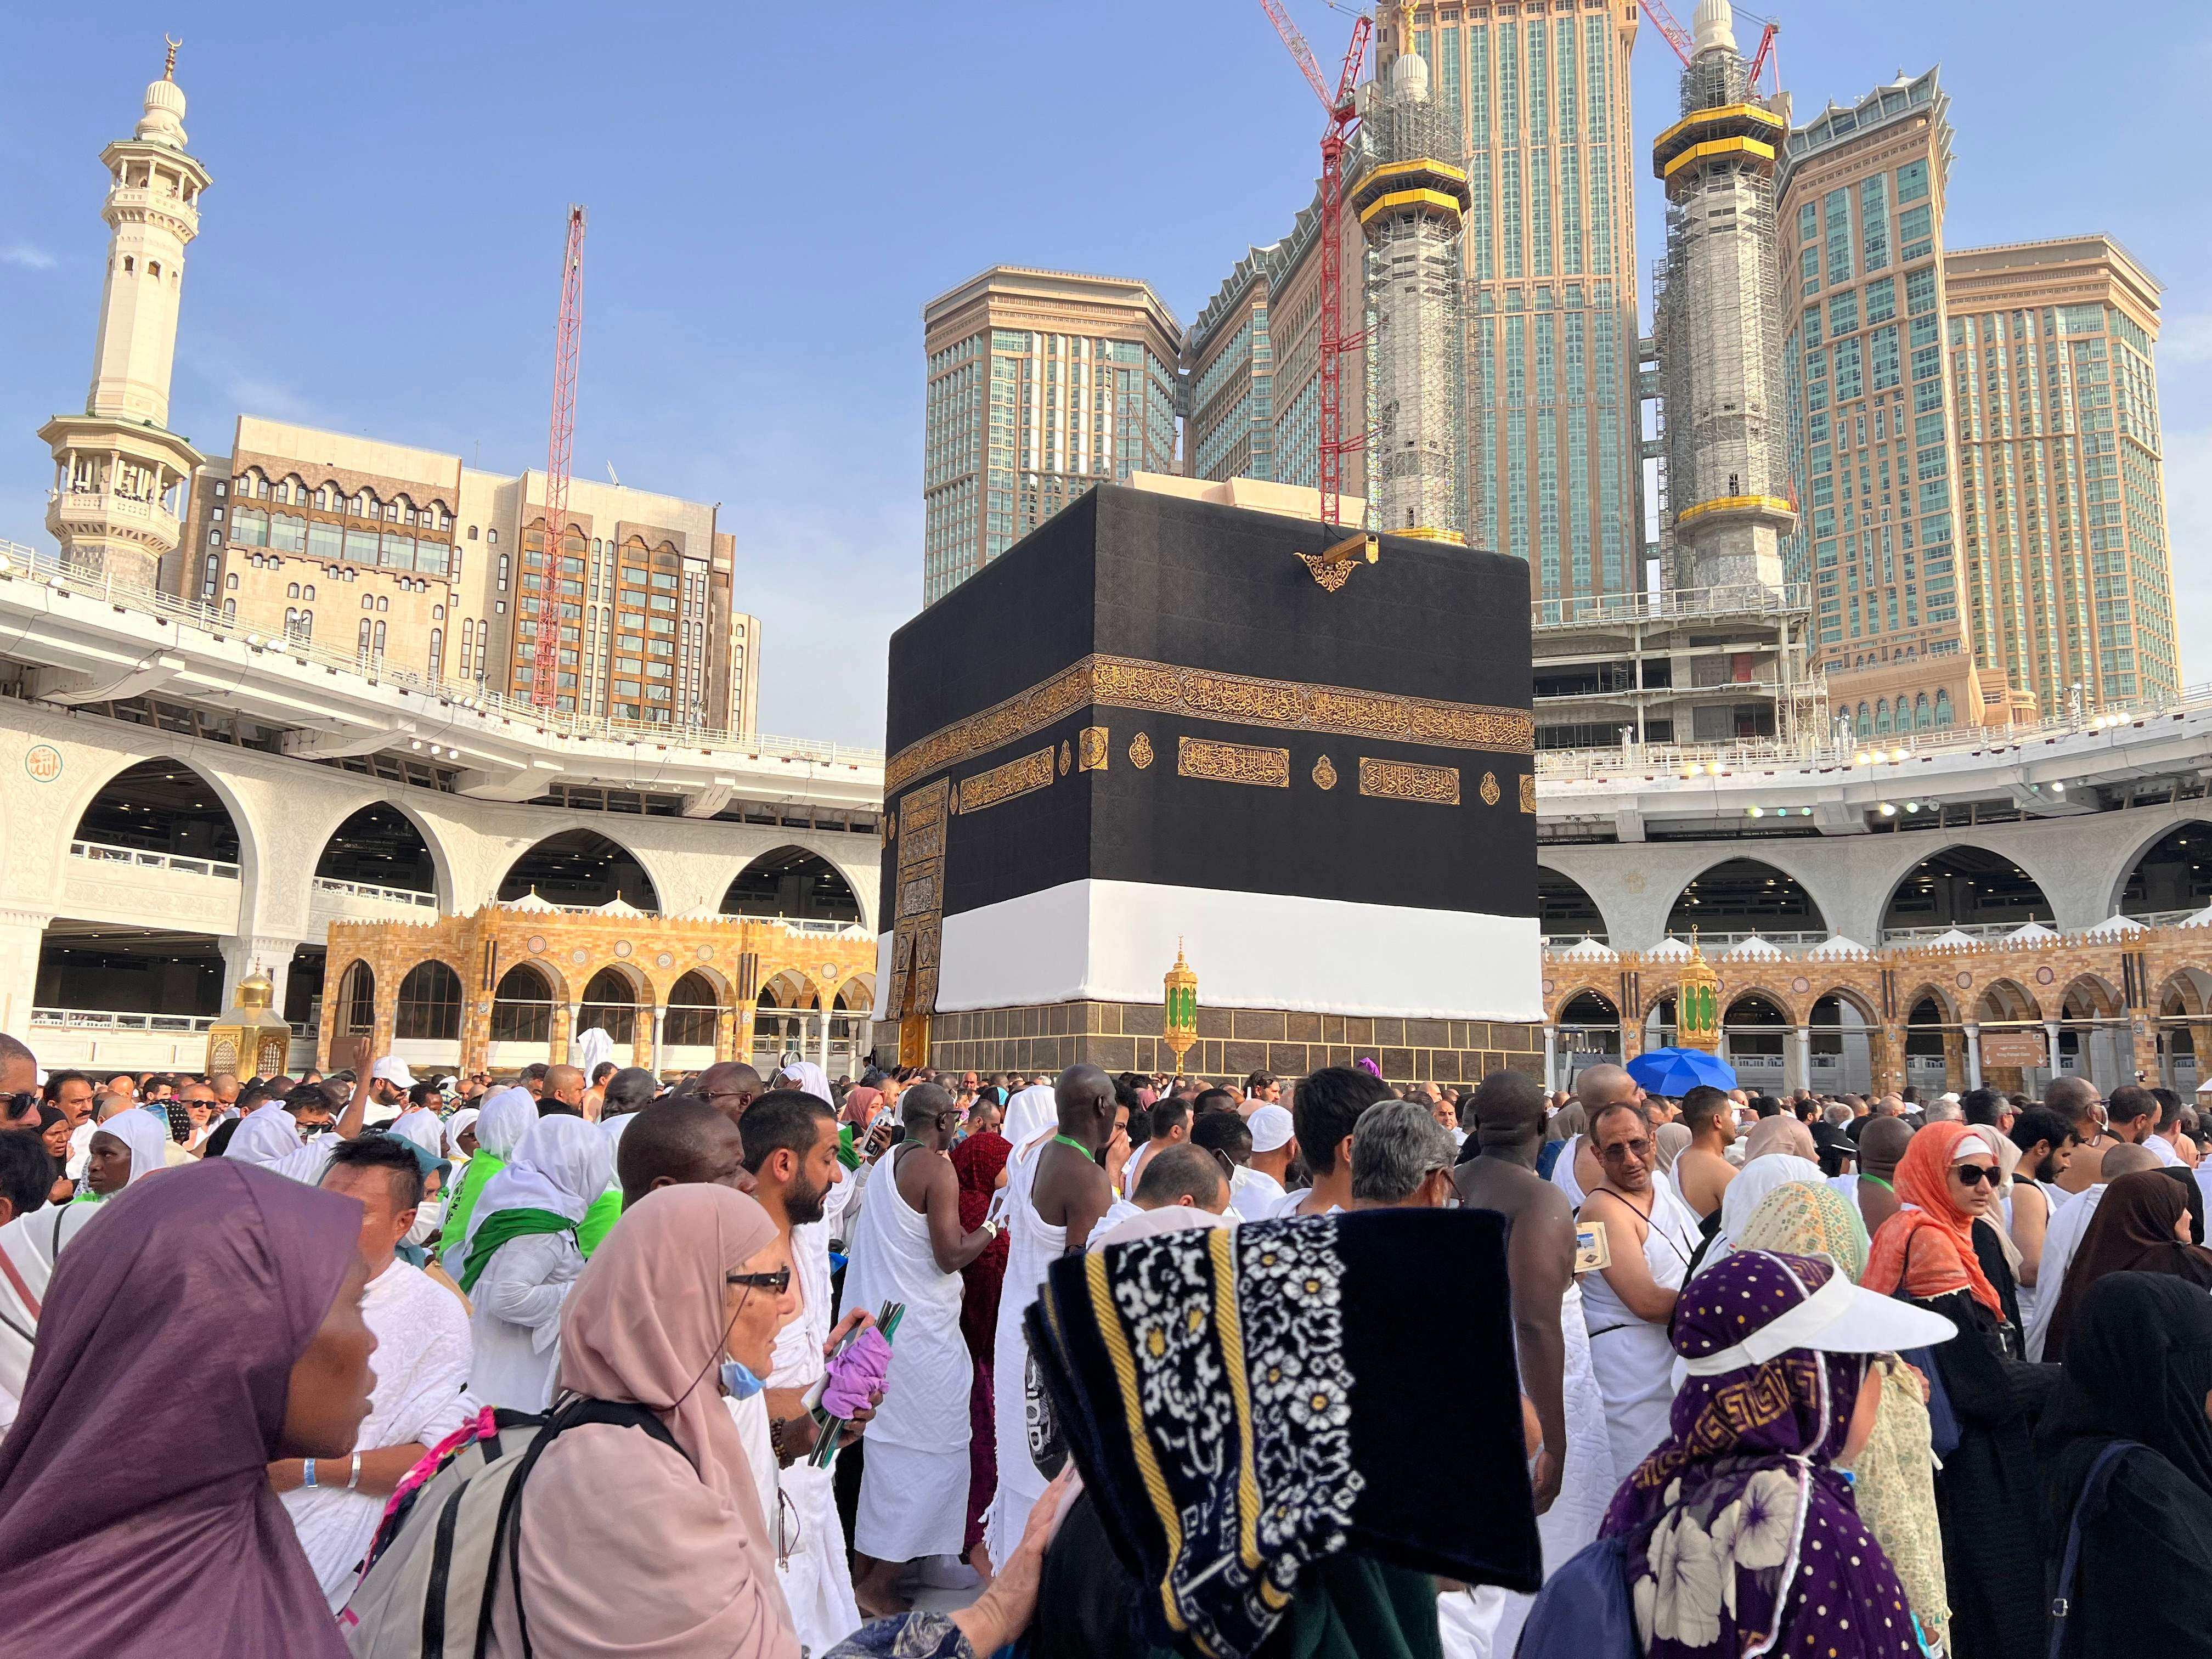 Muslim worshippers and pilgrims gather around the Kaaba, Islam’s holiest shrine, at the Grand Mosque in the holy city of Mecca on Saturday as they arrive for the annual Hajj pilgrimage. Photo: AFP